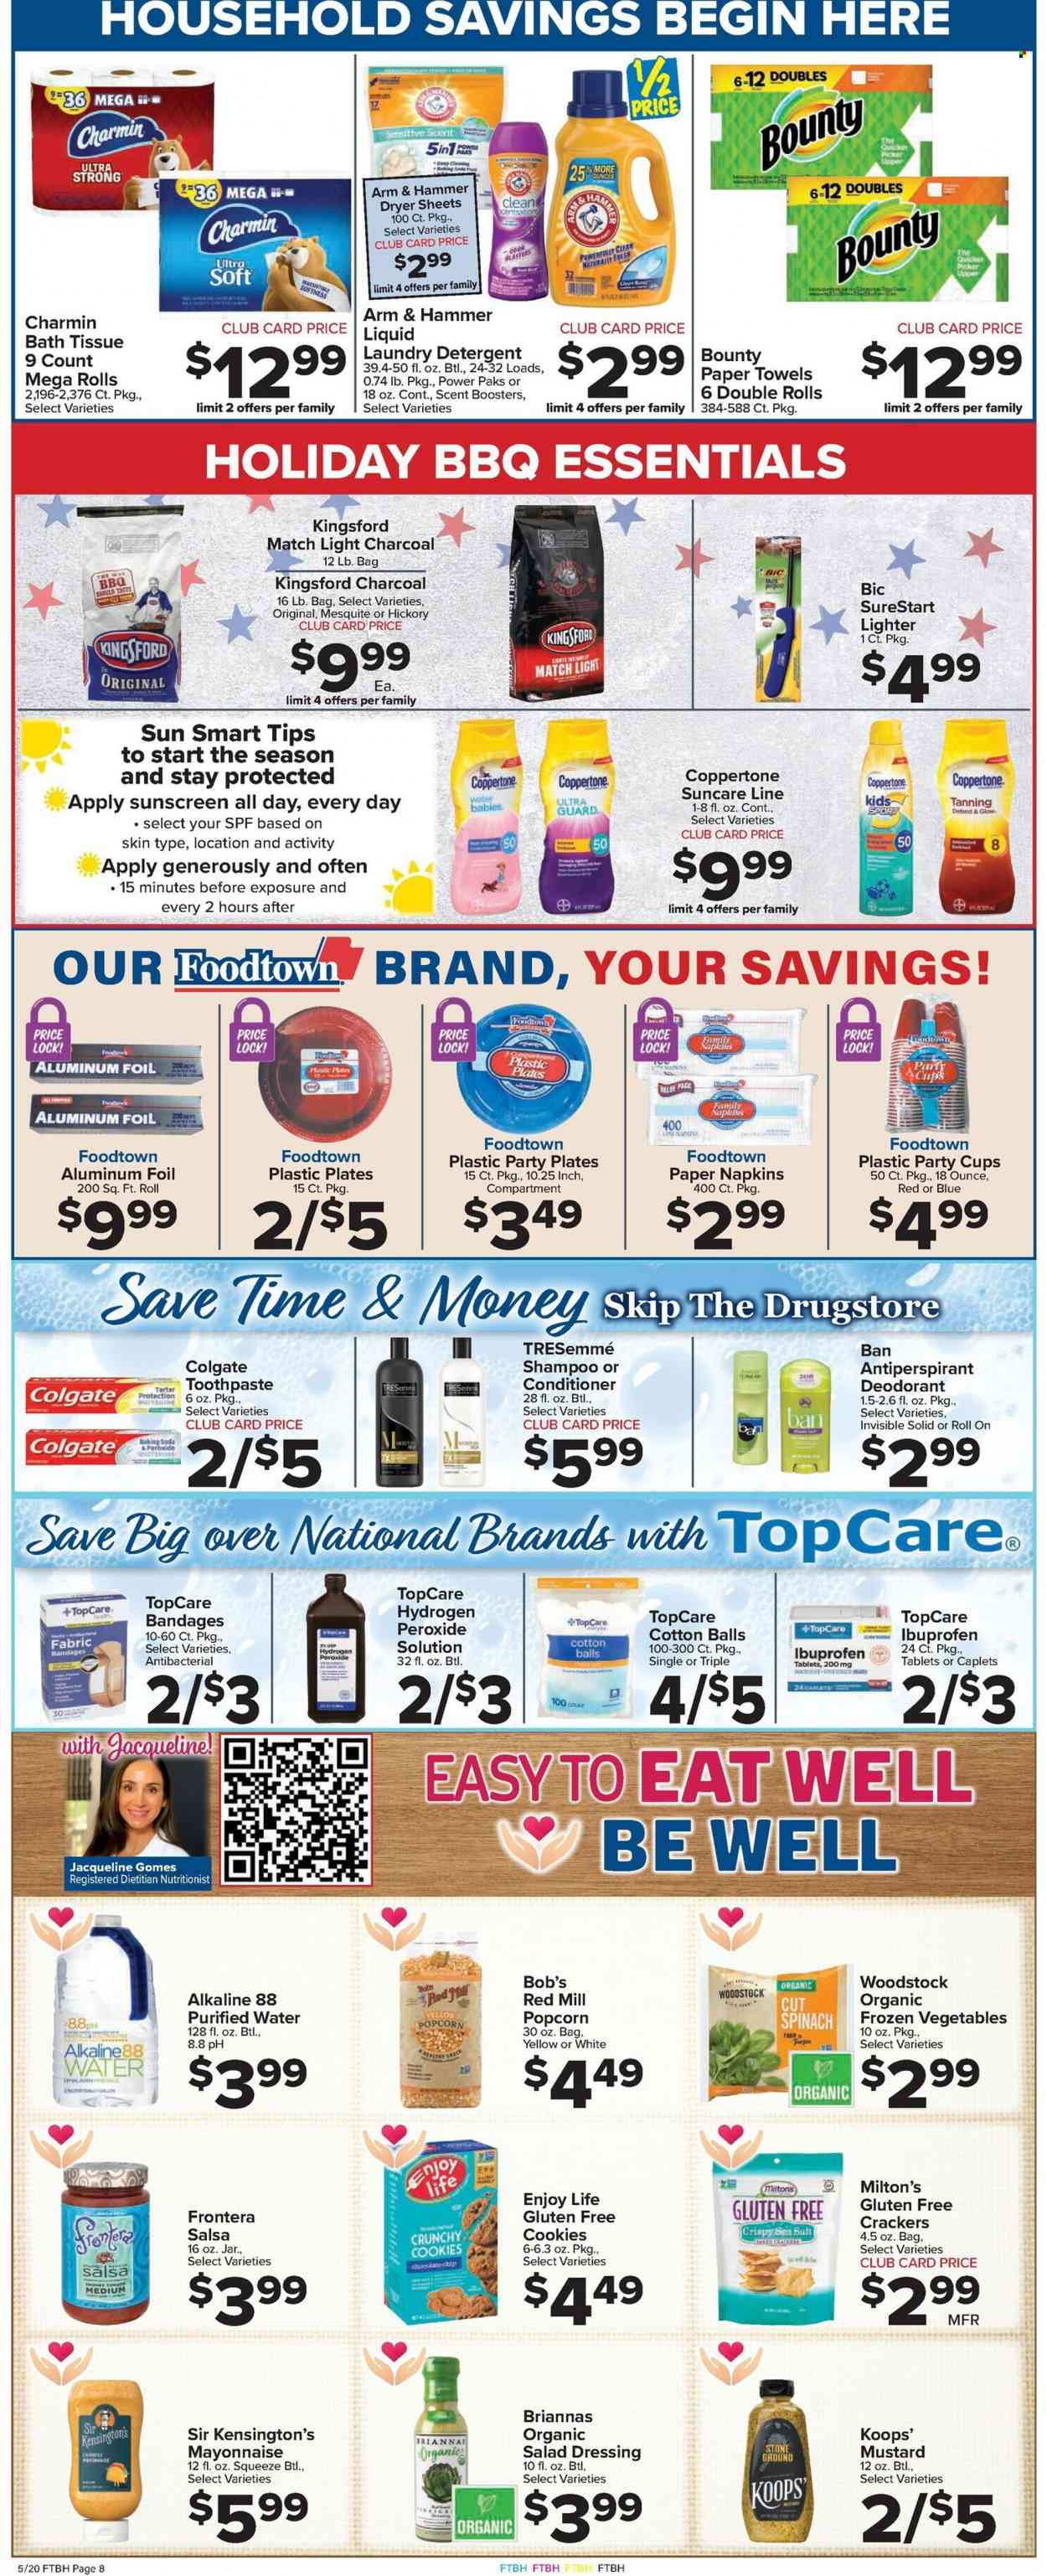 thumbnail - Foodtown Flyer - 05/20/2022 - 05/26/2022 - Sales products - spinach, mayonnaise, frozen vegetables, cookies, Bounty, crackers, popcorn, ARM & HAMMER, bicarbonate of soda, mustard, salad dressing, dressing, salsa, purified water, napkins, bath tissue, cotton balls, kitchen towels, paper towels, Charmin, detergent, laundry detergent, dryer sheets, scent booster, shampoo, Colgate, toothpaste, conditioner, TRESemmé, anti-perspirant, roll-on, deodorant, BIC, plate, cup, aluminium foil, Hama, plastic plate, party cups, Ibuprofen. Page 2.